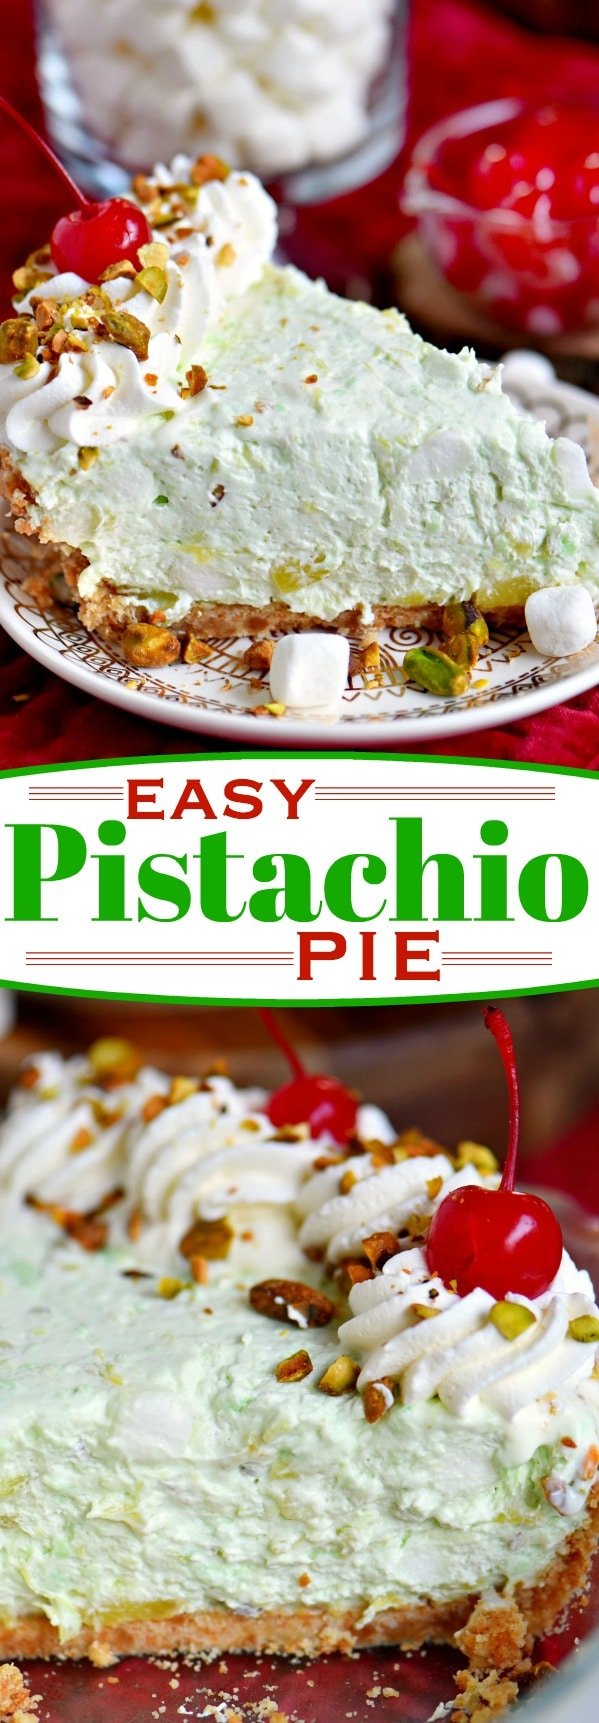 This easy Pistachio Pie recipe is a going to be hit with friends and family this holiday season! Extra creamy and completely irresisitble, this no bake pie recipe takes just minutes to prepare! Make sure to add it to your menu this year! // Mom On Timeout #pie #recipe #nobake #dessert #pistachio #creamcheese #holiday #Christmas #momontimeout